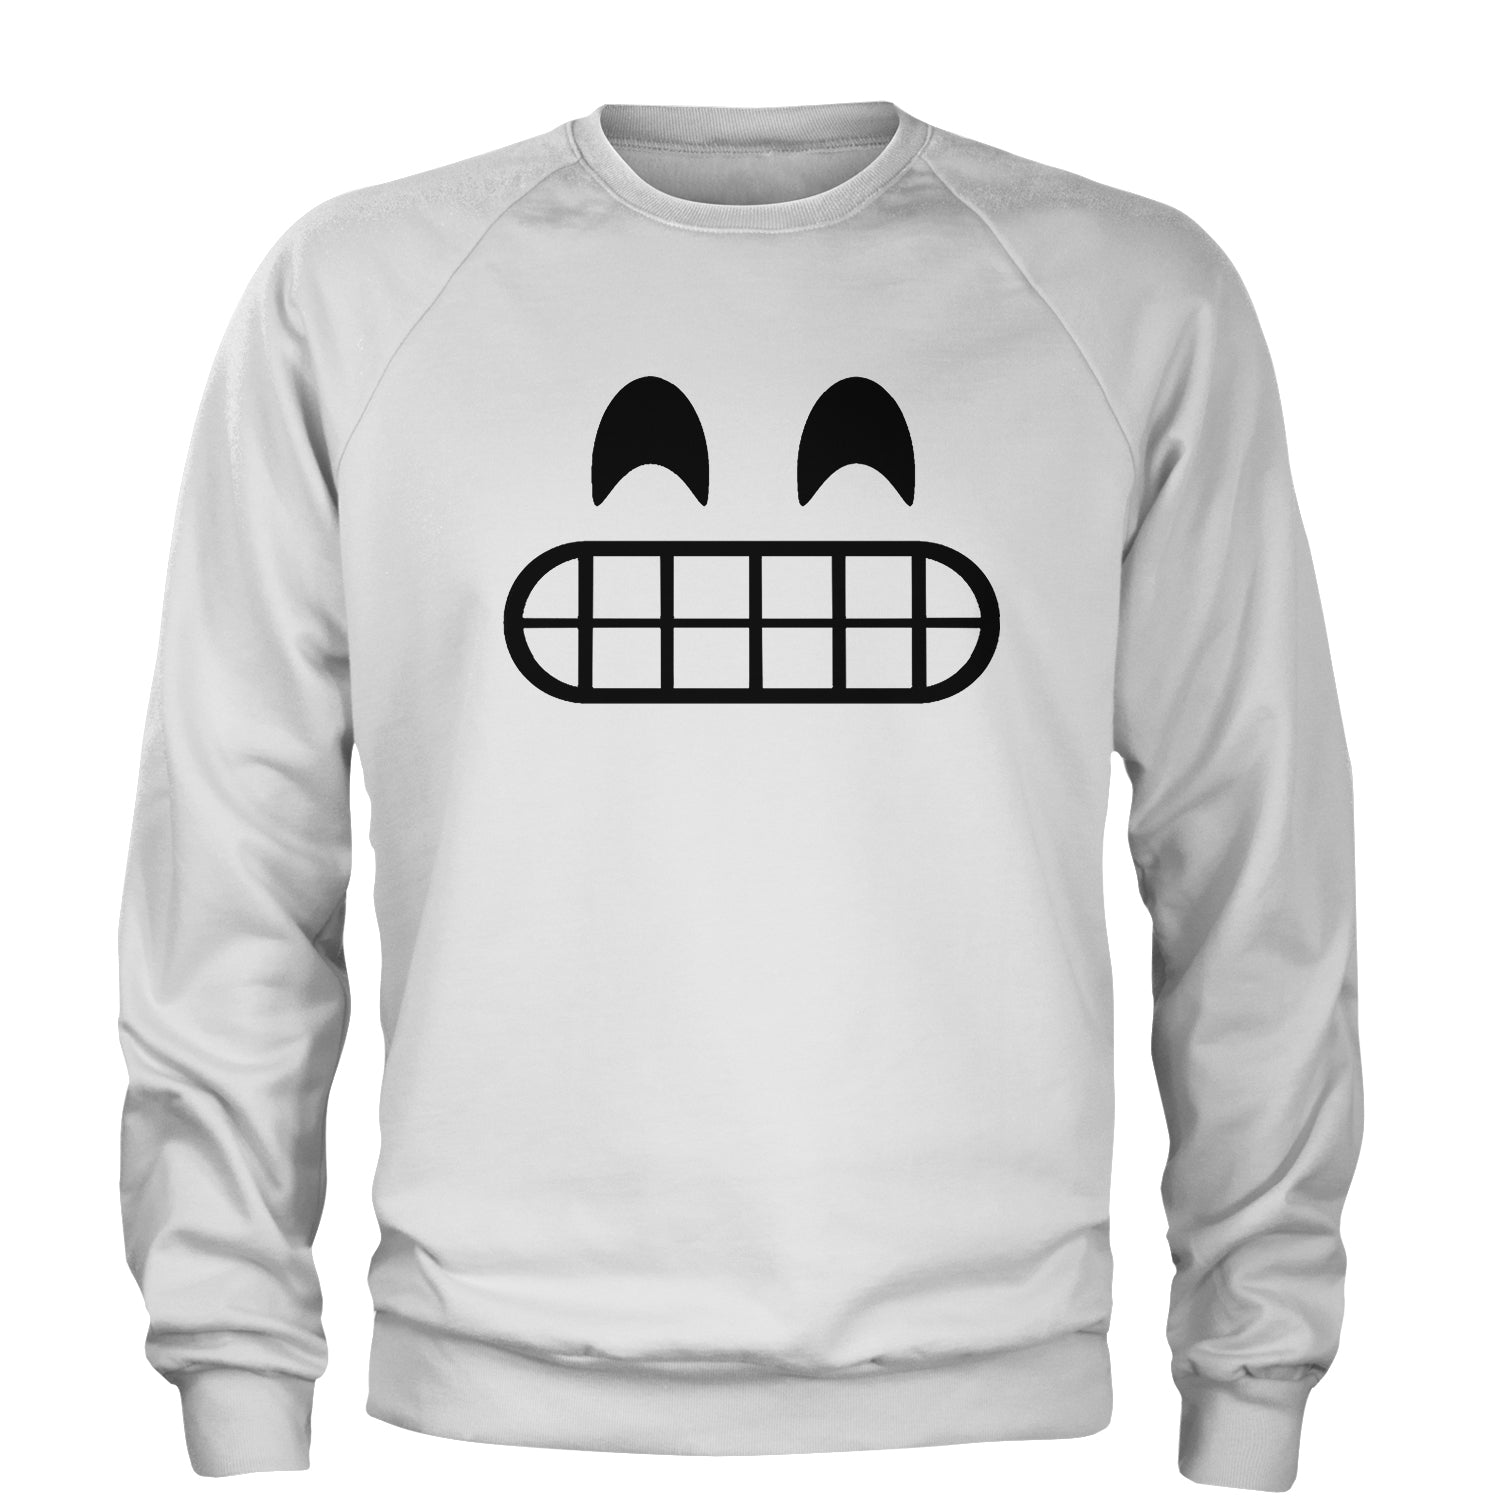 Emoticon Grinning Smile Face Adult Crewneck Sweatshirt cosplay, costume, dress, emoji, emote, face, halloween, smiley, up, yellow by Expression Tees